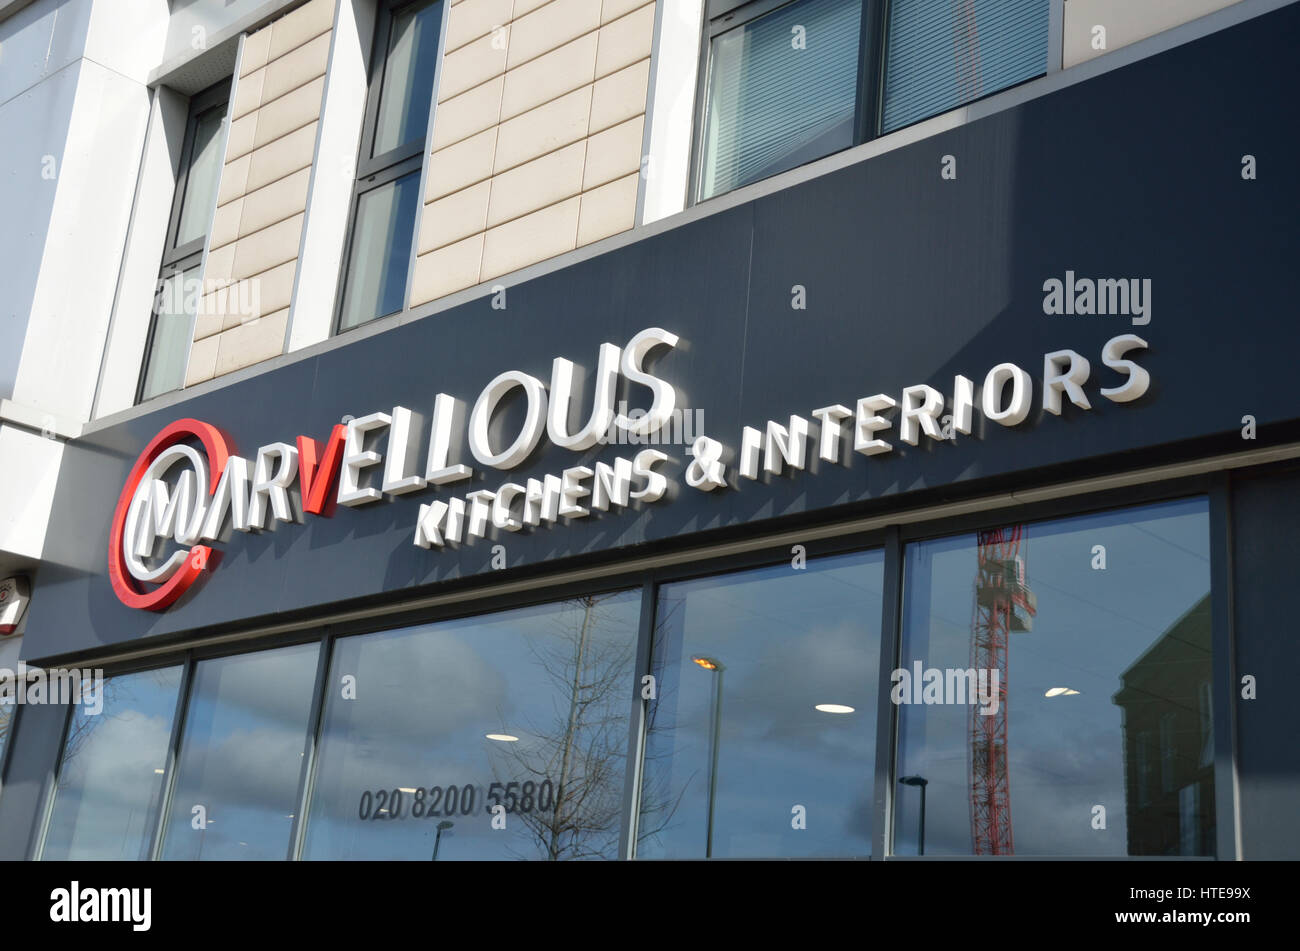 Marvellous Kitchens and Interiors store in Edgware Road, Colindale, London, UK. Stock Photo